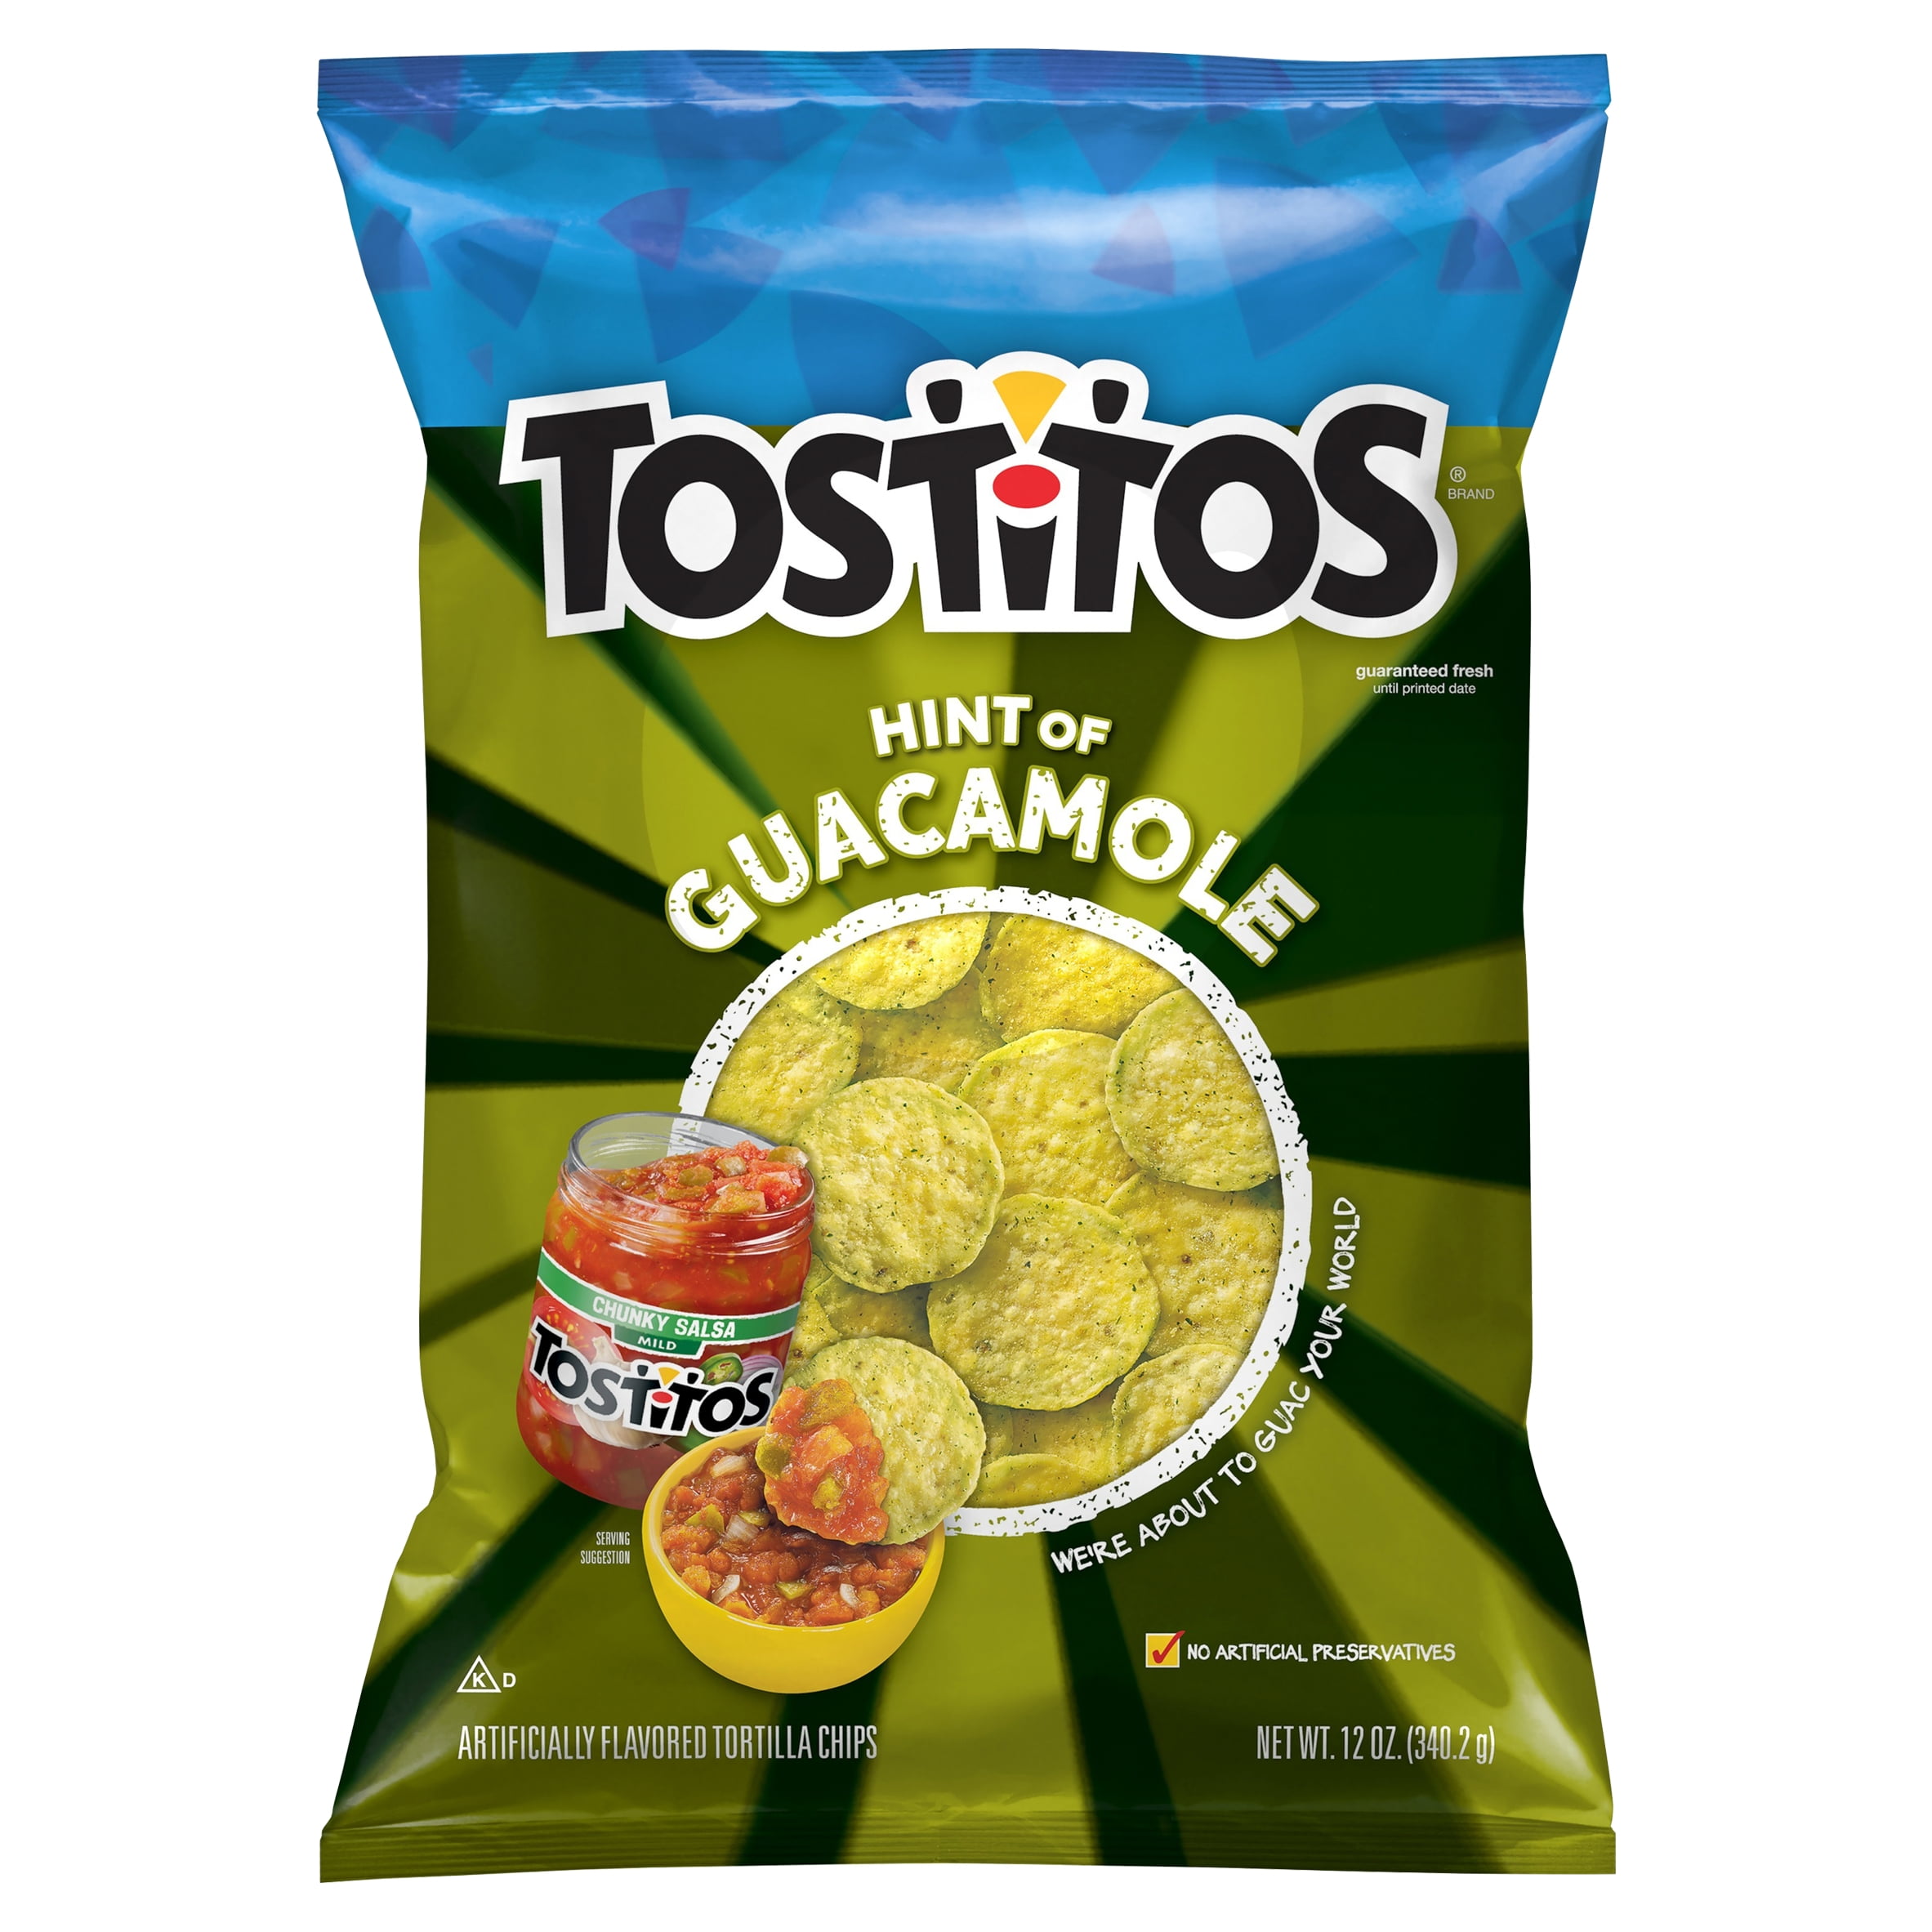 Tostitos Hint Of Guacamole Flavored Bite Size Rounds Tortilla Chips 12 Oz Bag